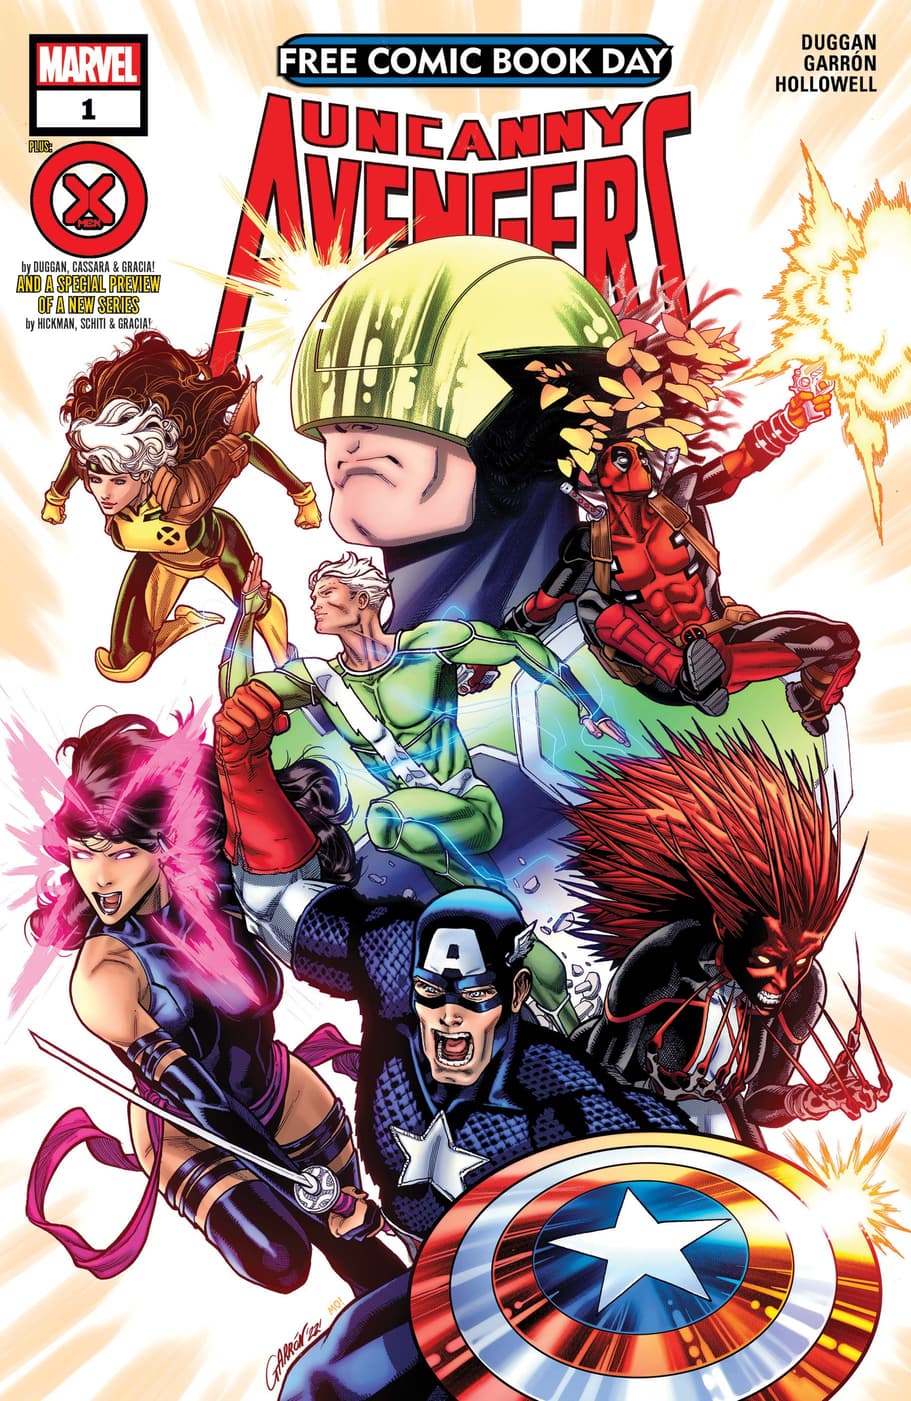 FREE COMIC BOOK DAY 2023: AVENGERS/X-MEN #1 cover by Javier Garrón & Morry Hollowell